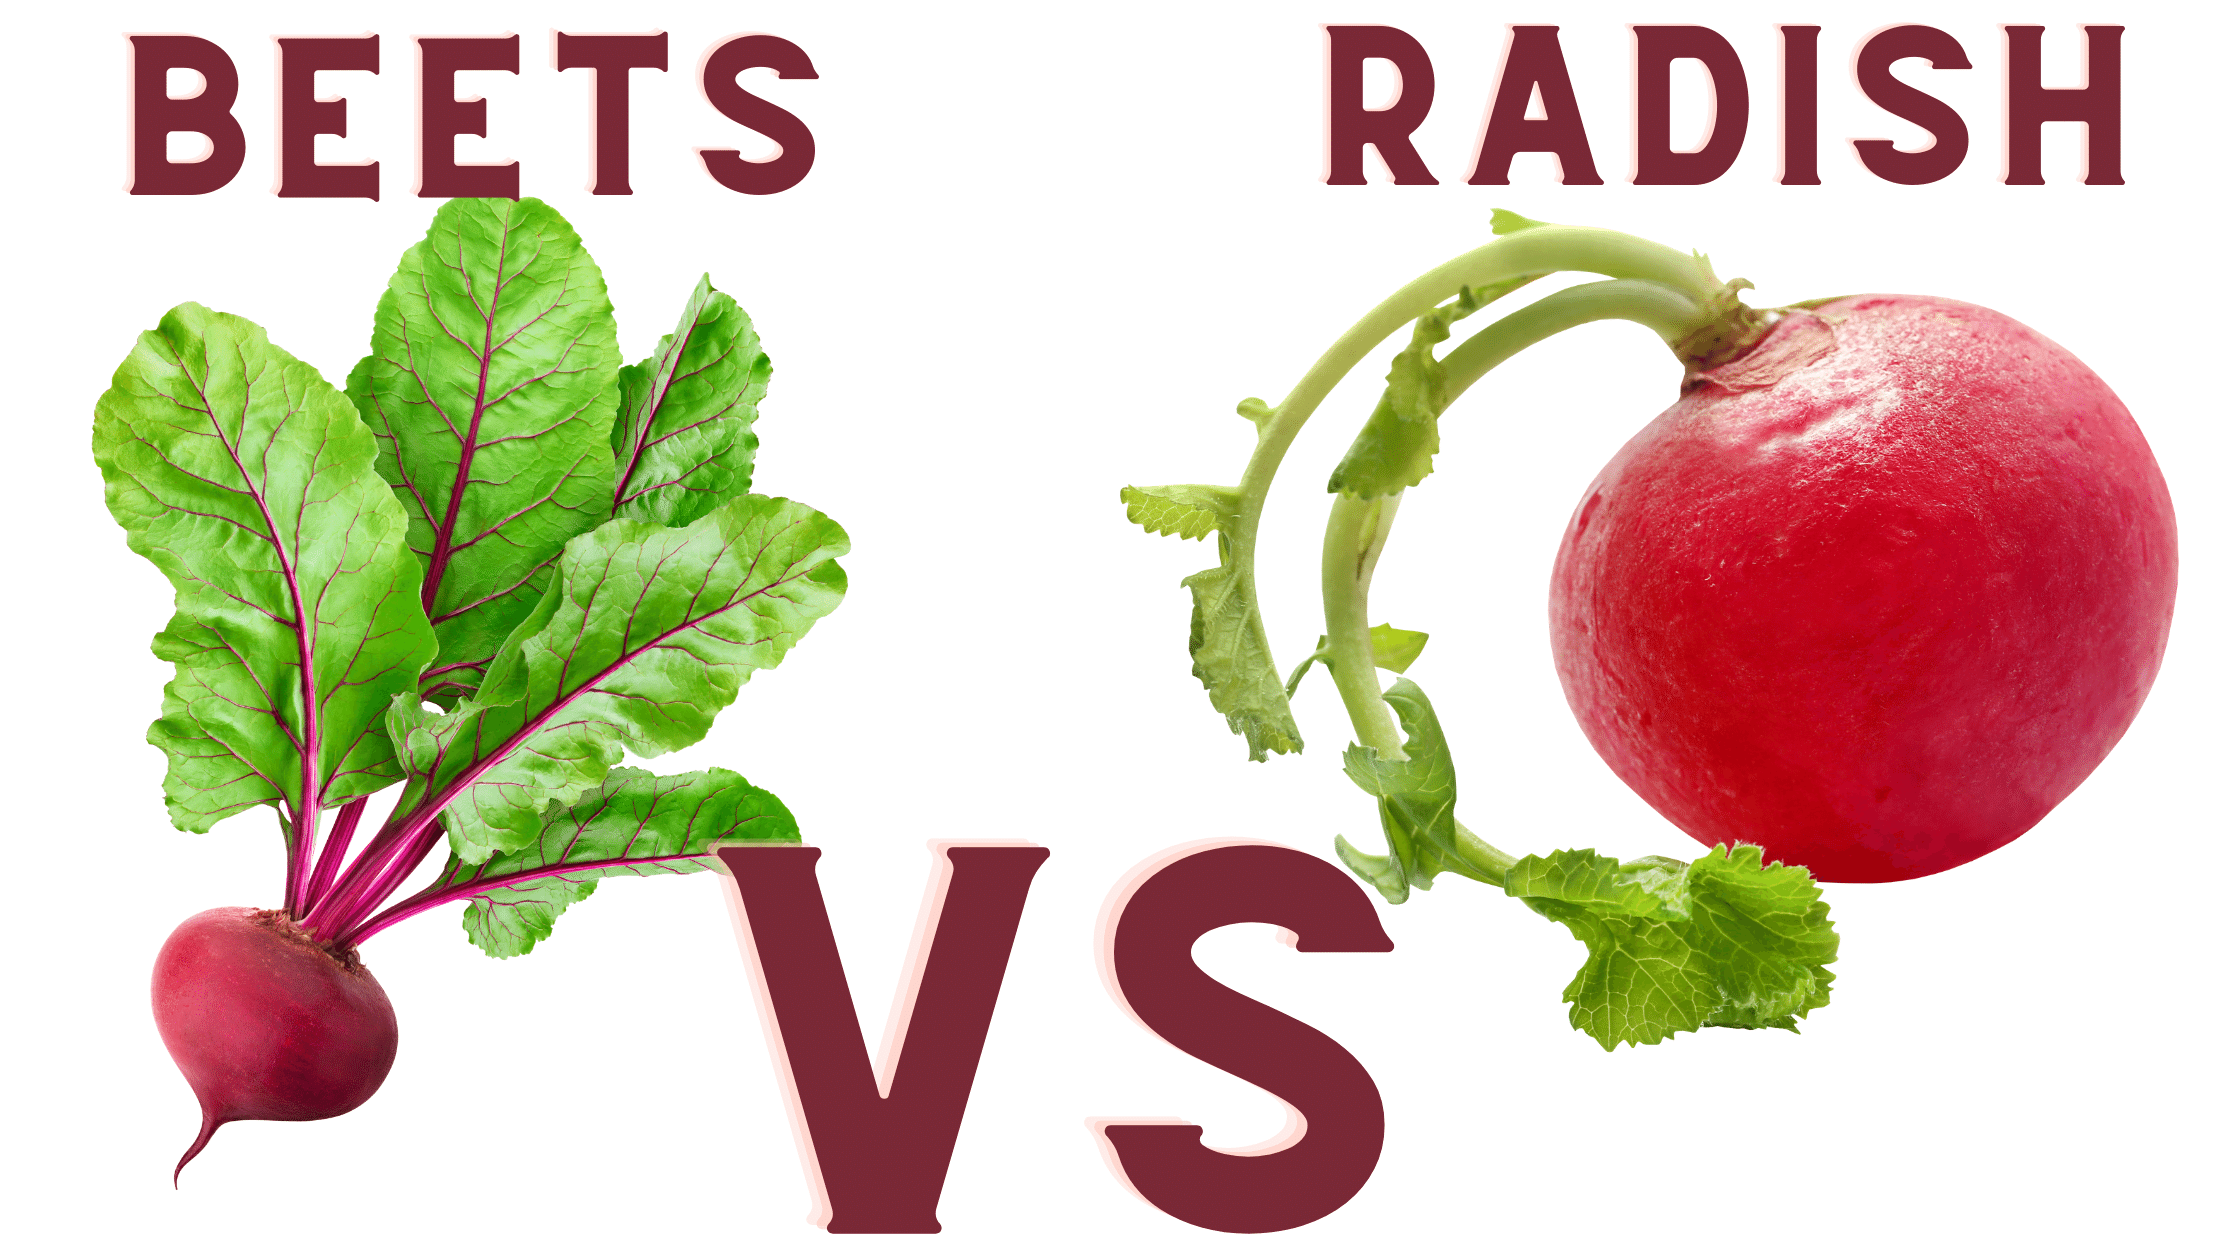 Image of Radish and beet plant growing next to each other